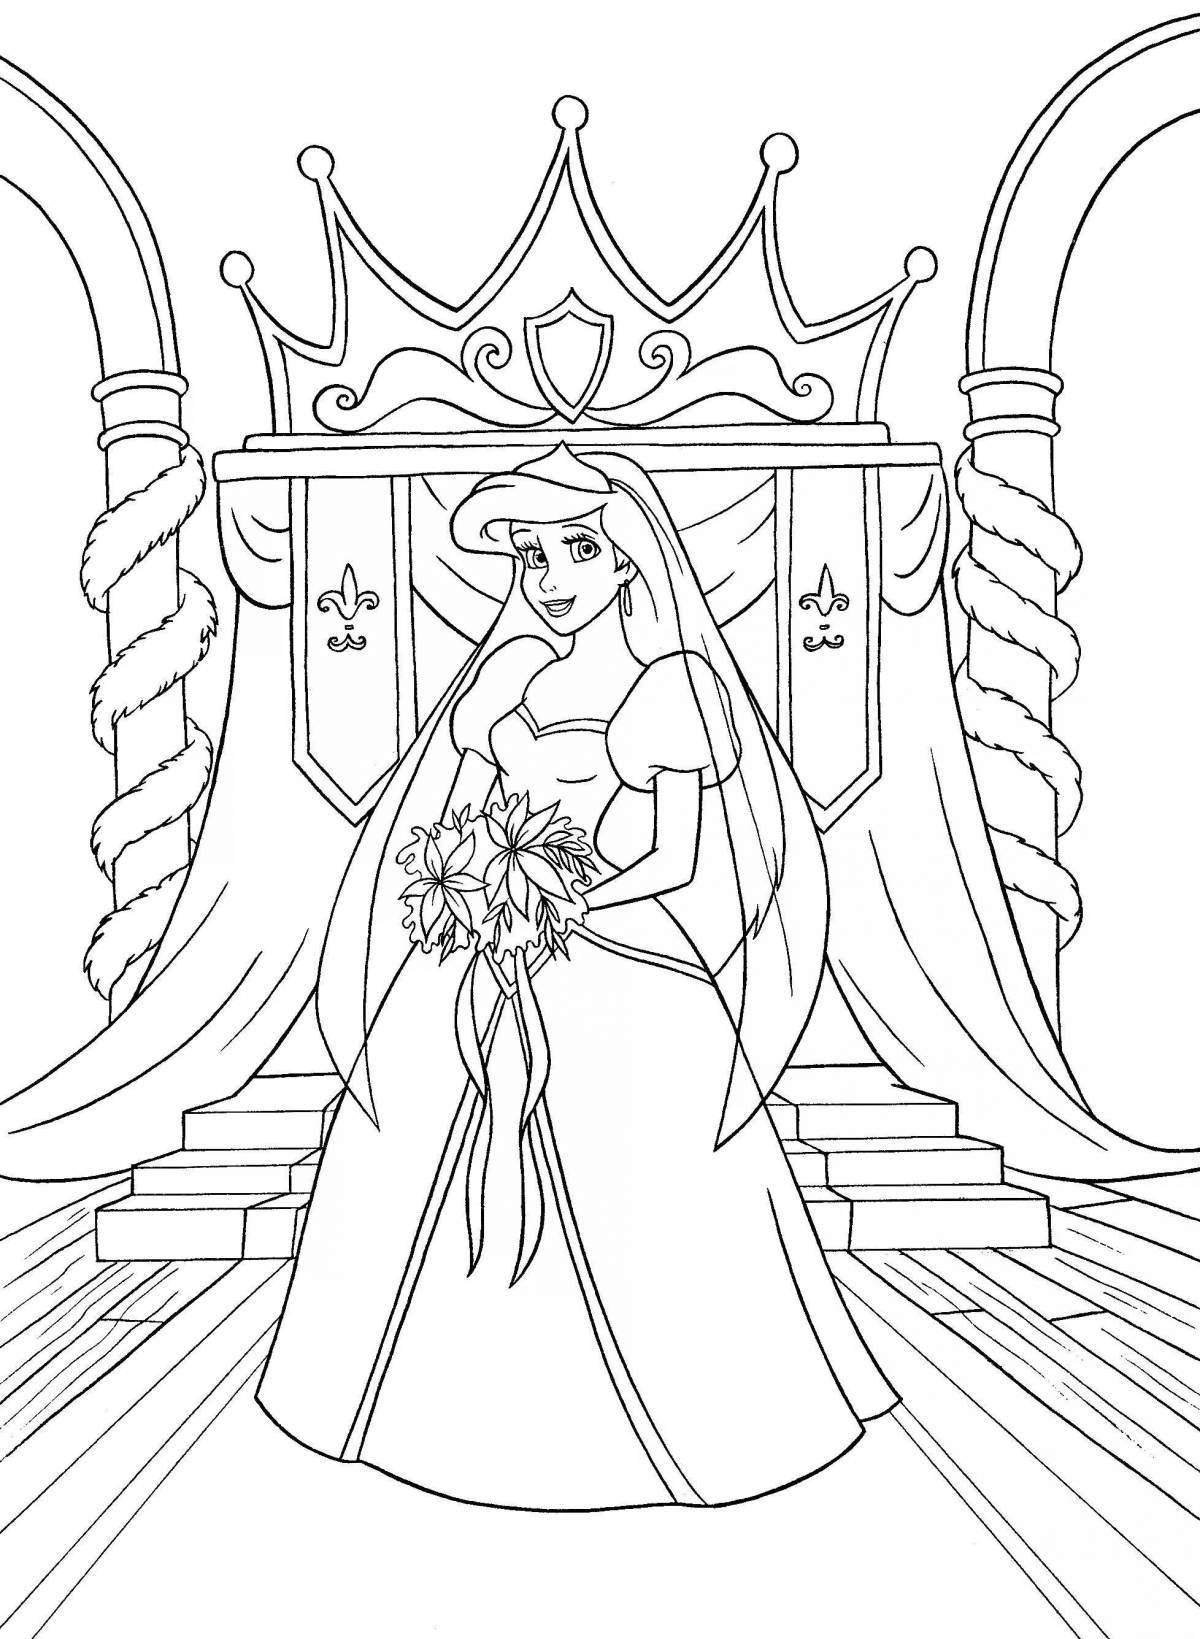 Royal coloring book for girls princess castle